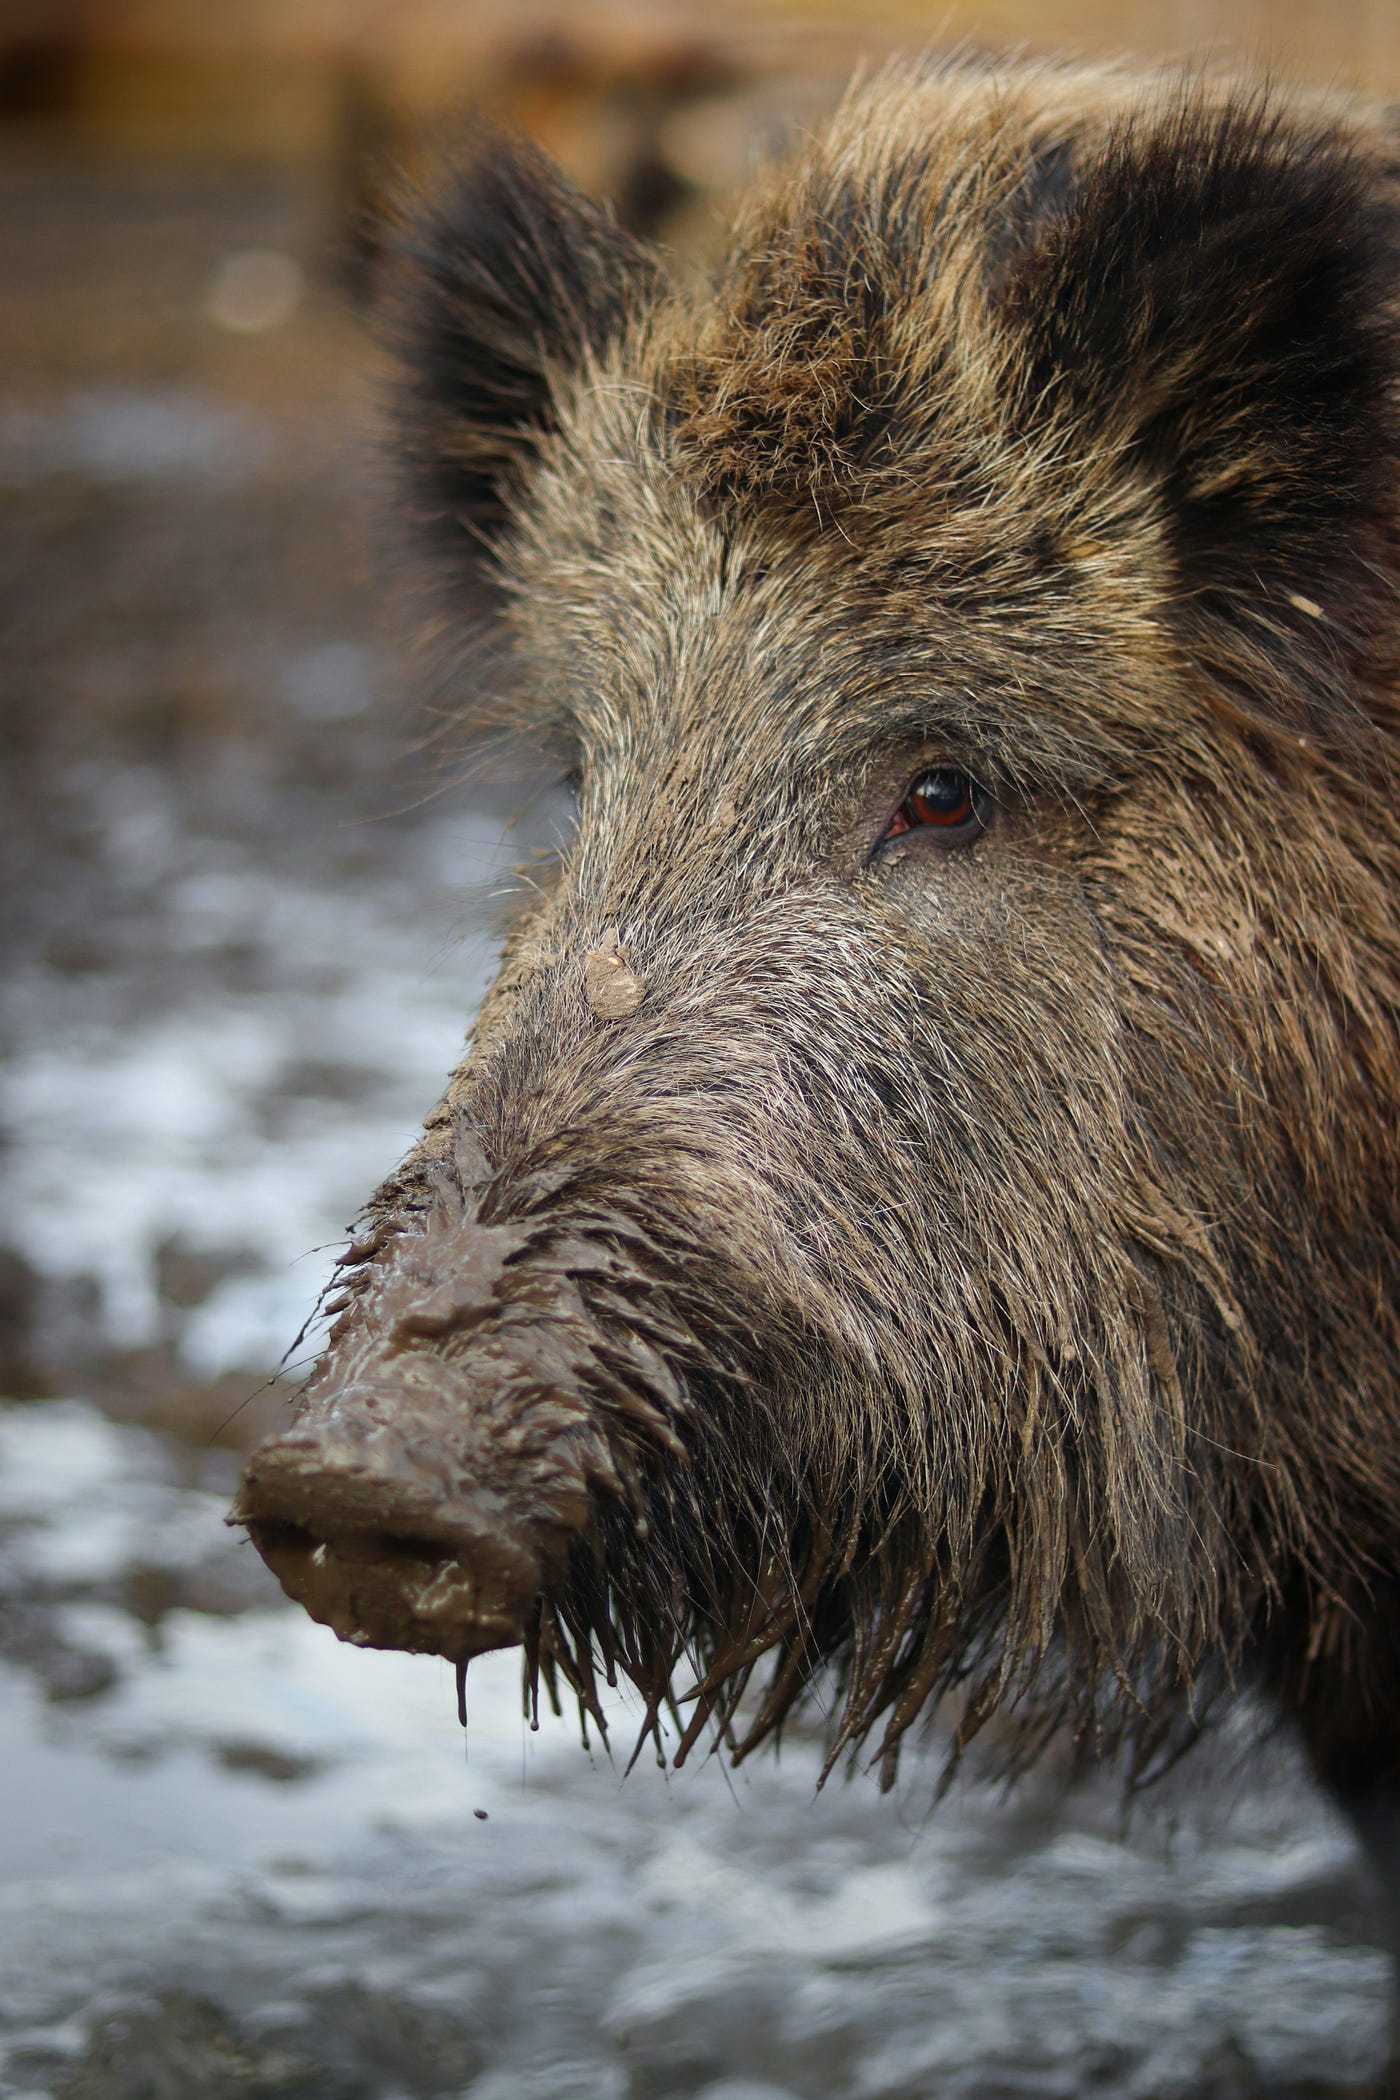 A boar, seen in closeup. Did you know that the bristle toothbrush, similar to the ones we use today, was not invented until 1498 in China? I would not have loved the historical brushes, though. The bristles were the stiff and coarse hairs taken from the back of a hog’s neck. The brush’s handles were made of bamboo or bone.